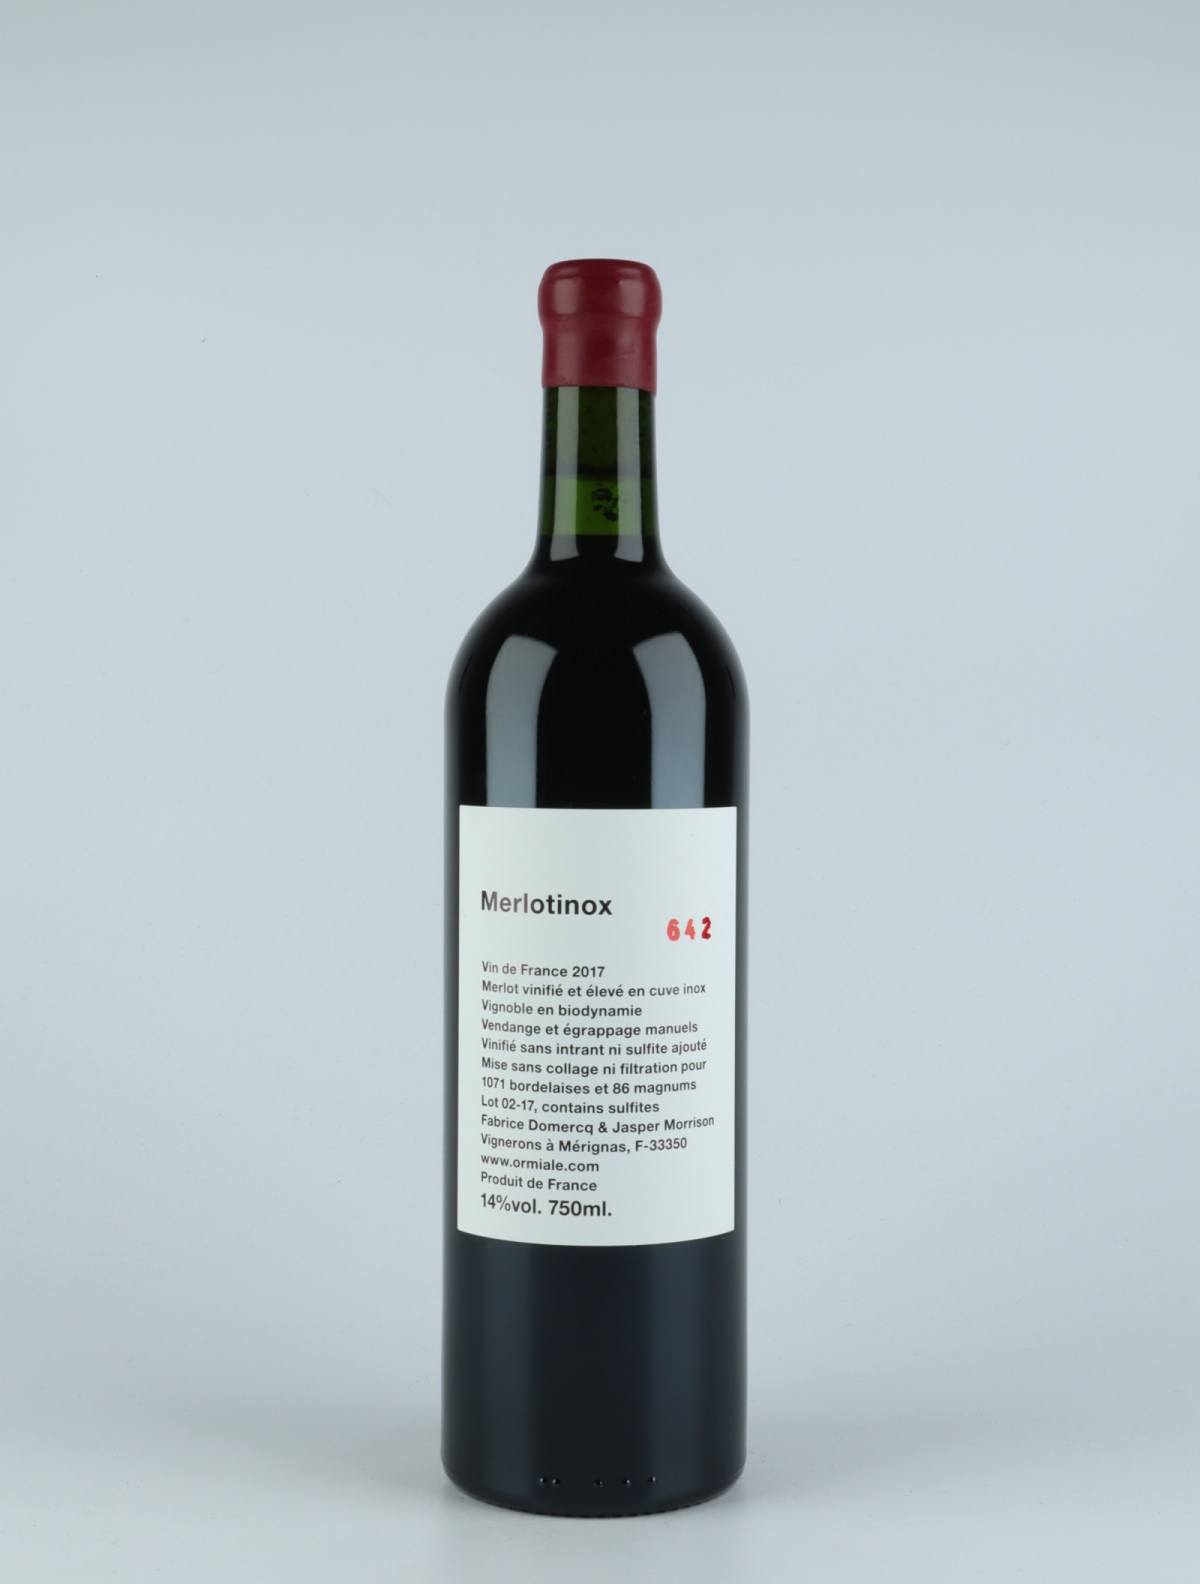 A bottle 2017 Merlotinox Red wine from Ormiale, Bordeaux in France